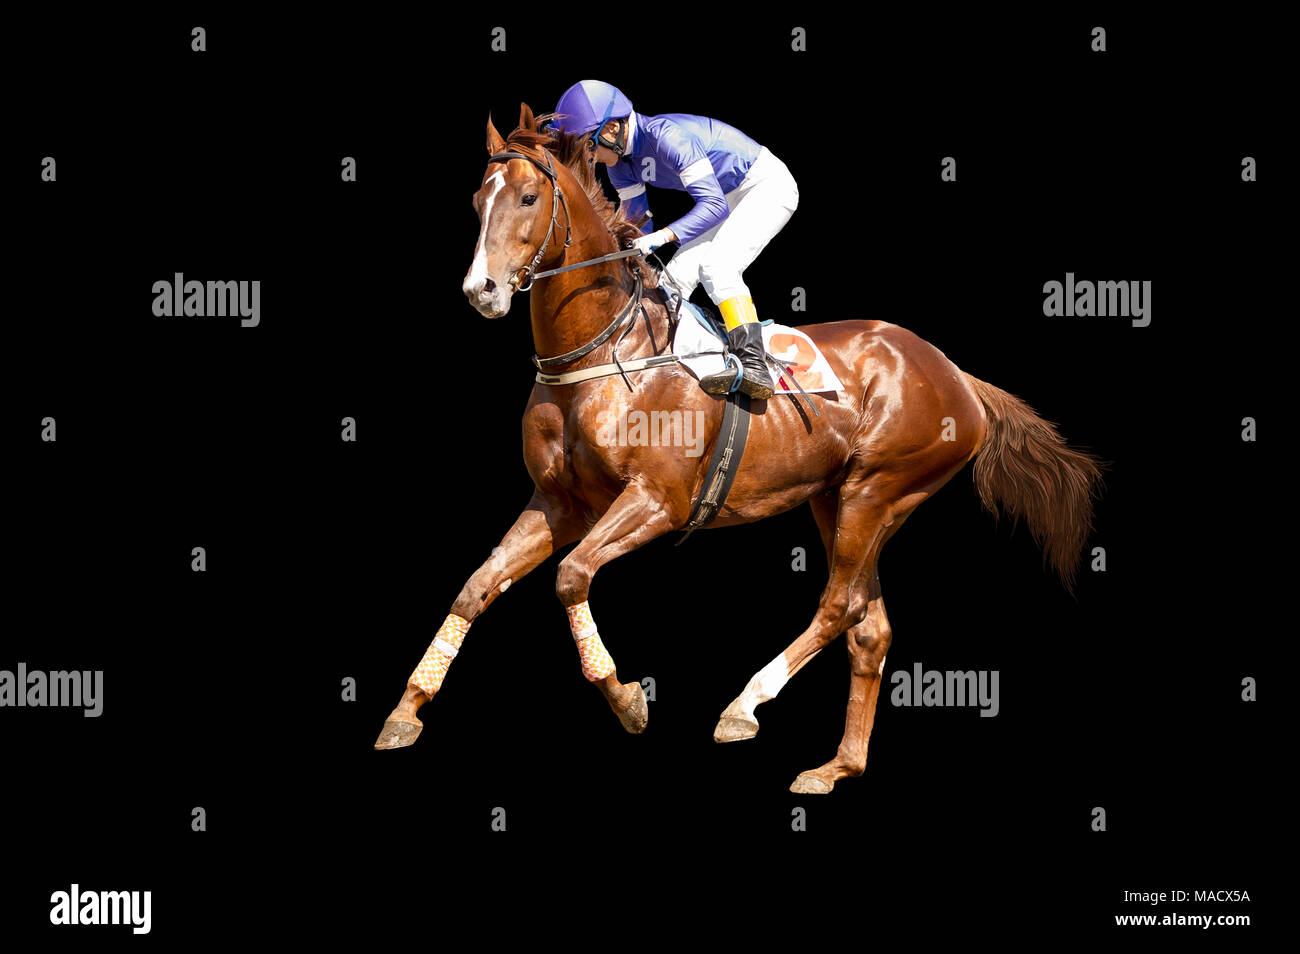 Jokey on a thoroughbred horse in blue closes runs isolated on black background Stock Photo